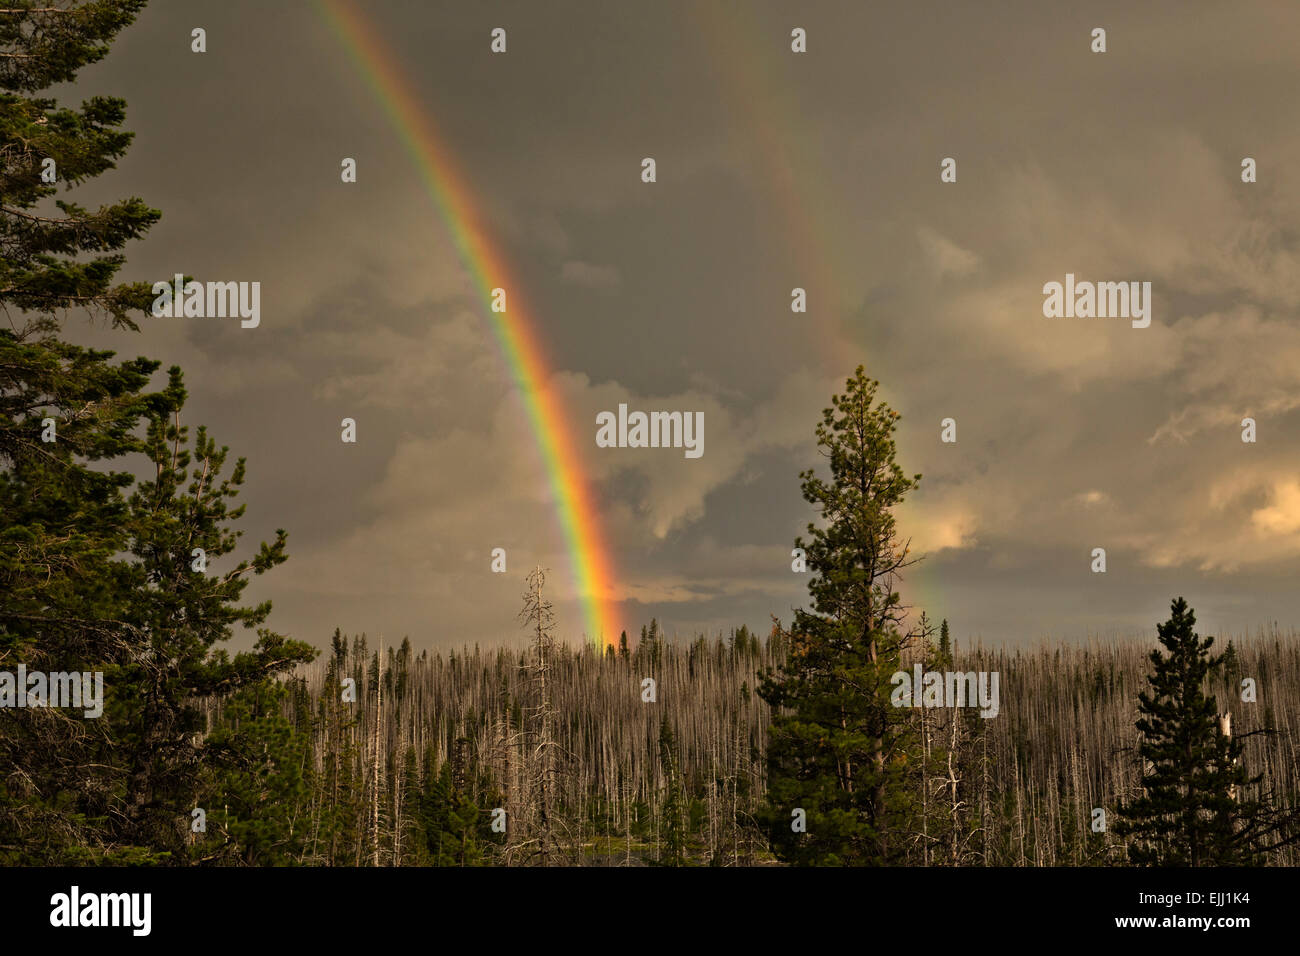 OR01790-00...OREGON - A rainbow over a burnt forest around Jack Lake in the Deschutes National Forest. Stock Photo